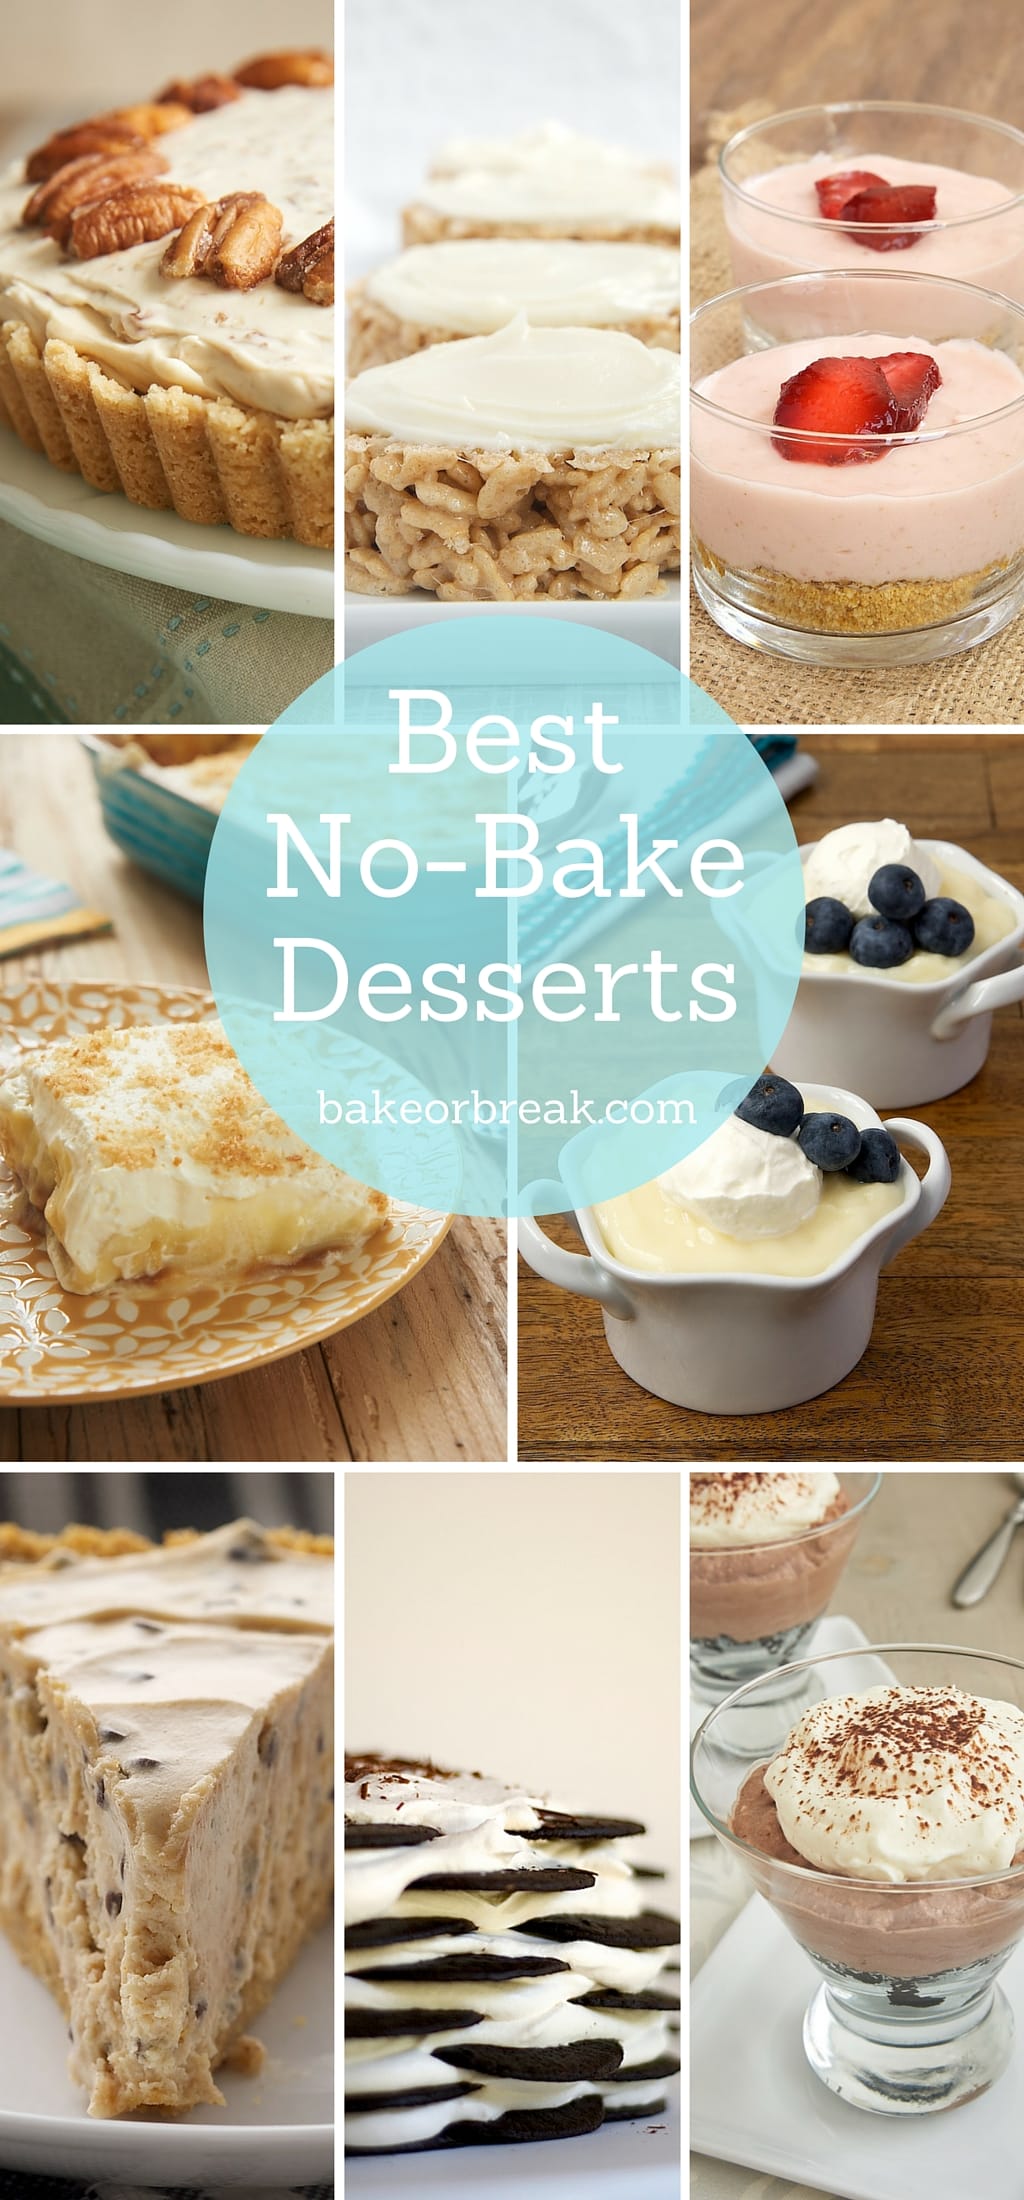 Leave your oven turned off and whip up one of Bake or Break's favorite no-bake desserts!